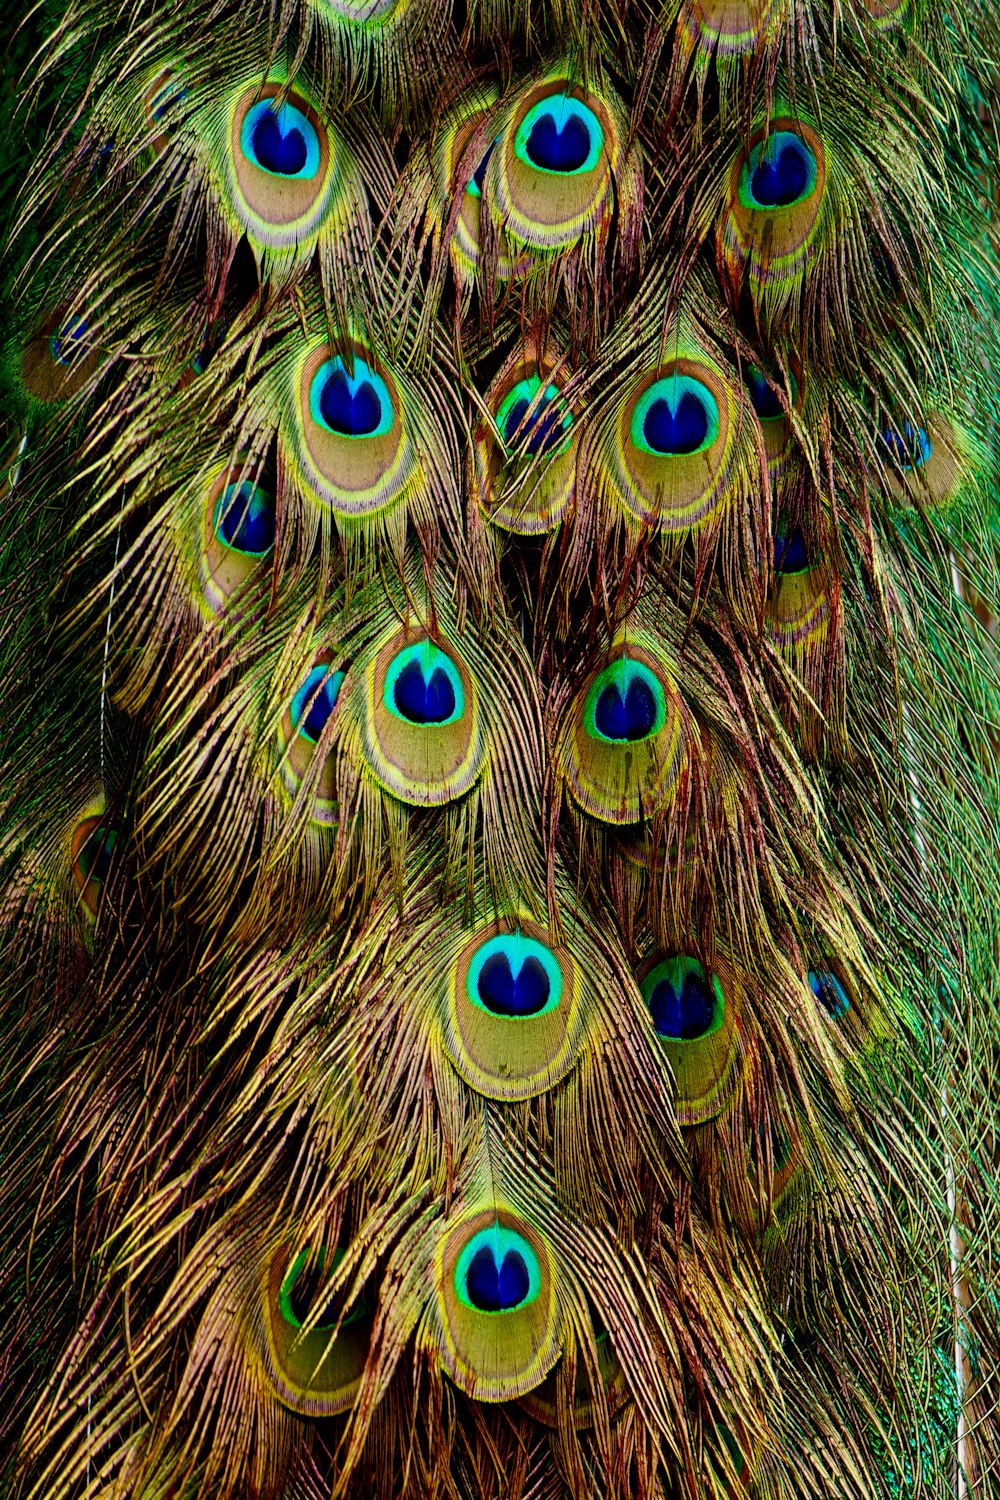 a peacock with many feathers